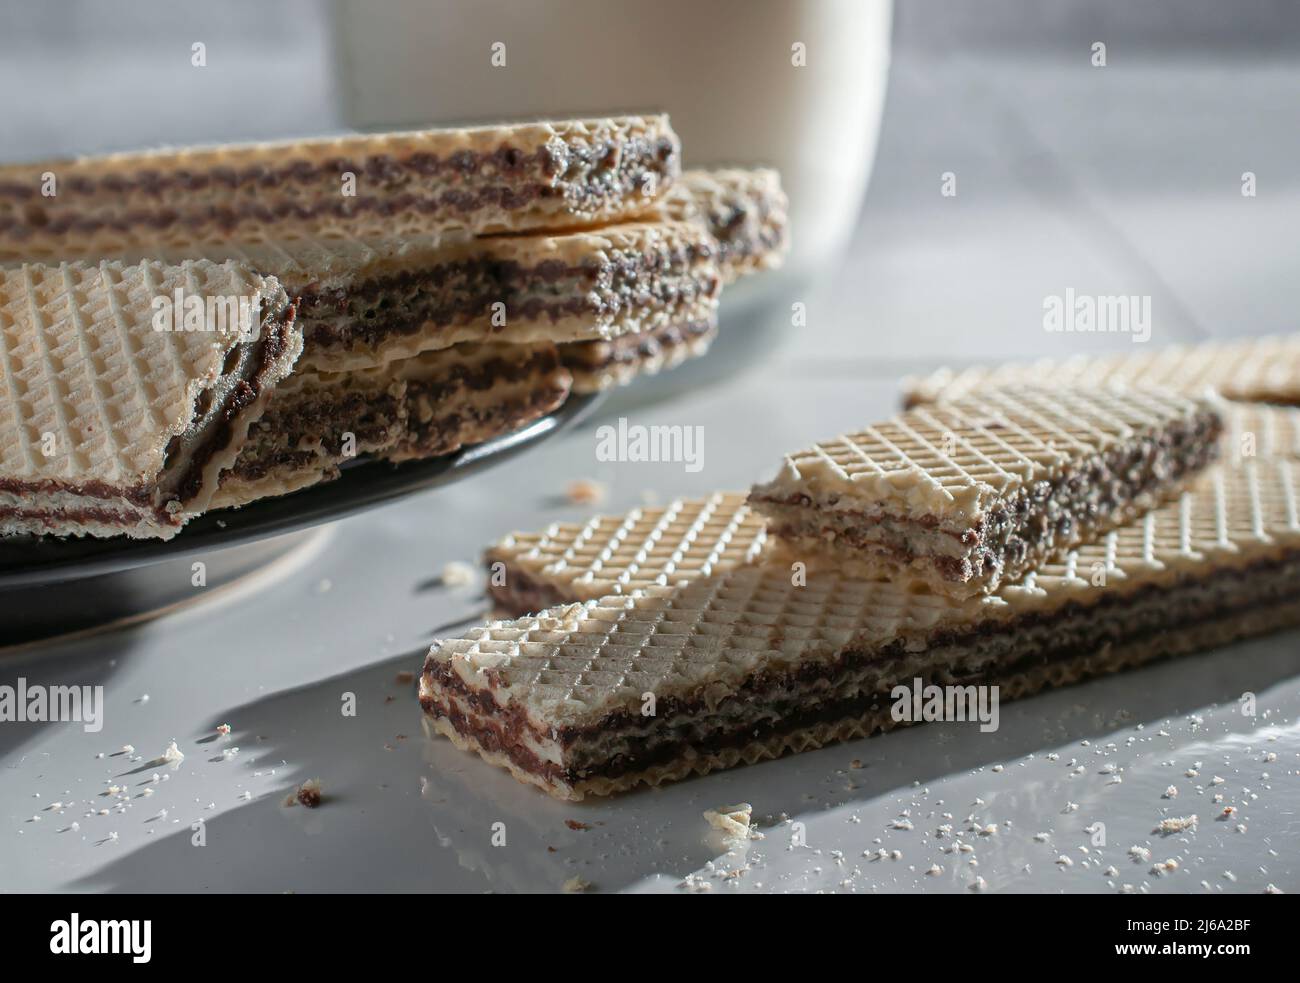 wafer cookies on a black plate and on a white table, with a glass of cold milk on the side lit by the sunlight coming from a window Stock Photo